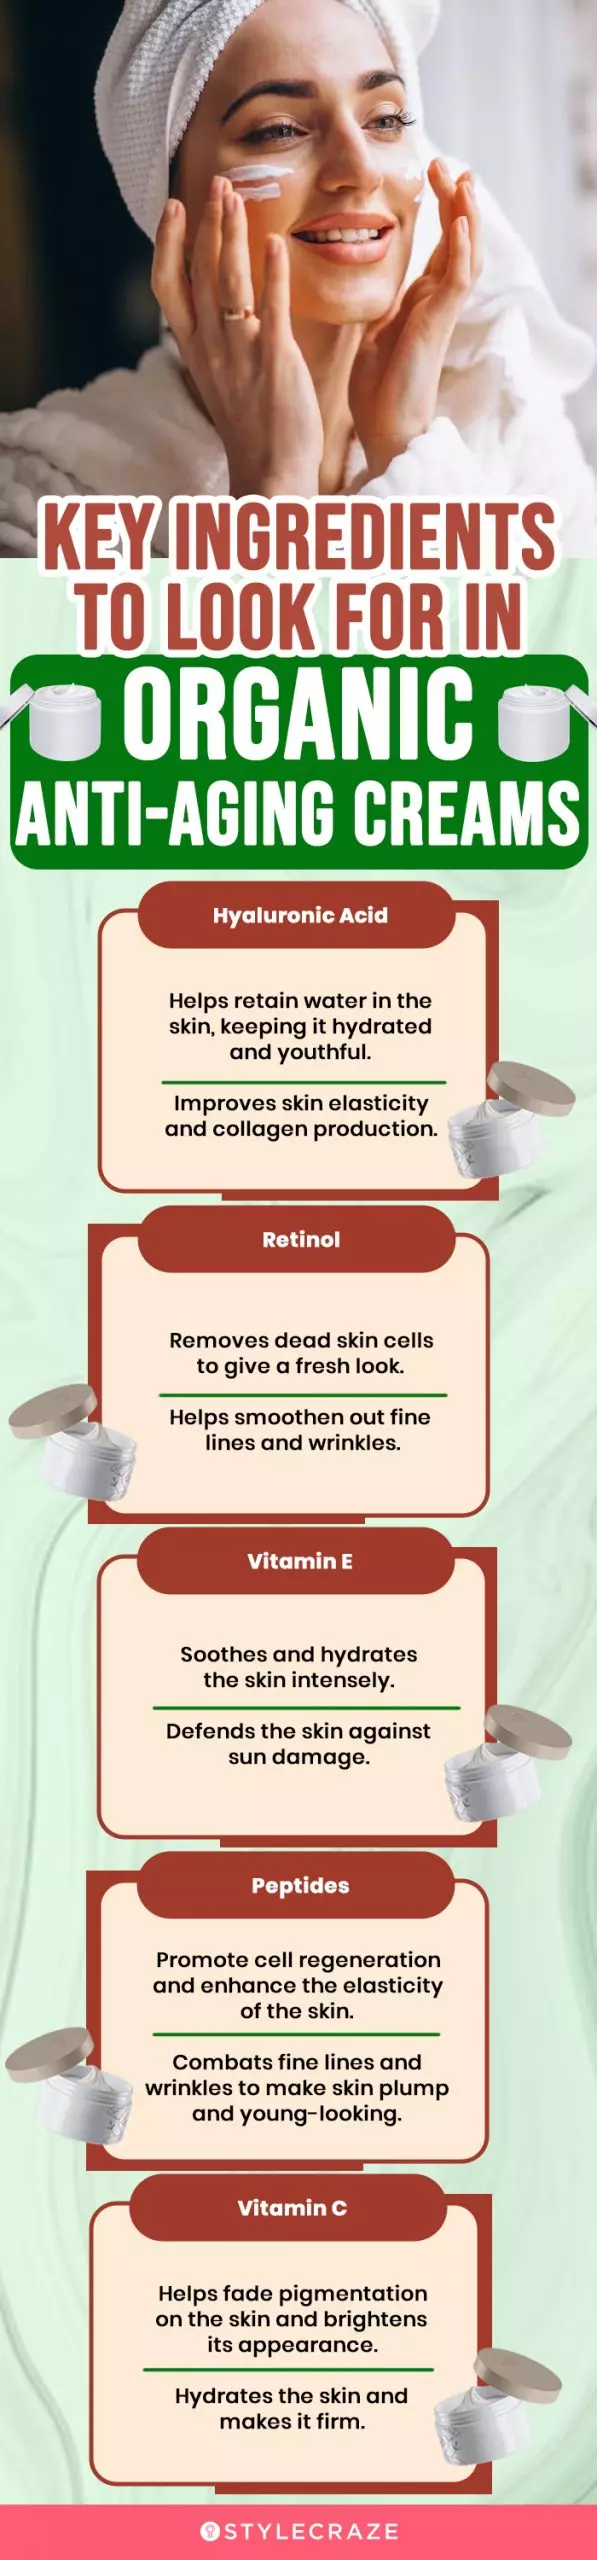 Key Ingredients To Look For In Organic Anti-Aging Creams (infographic)